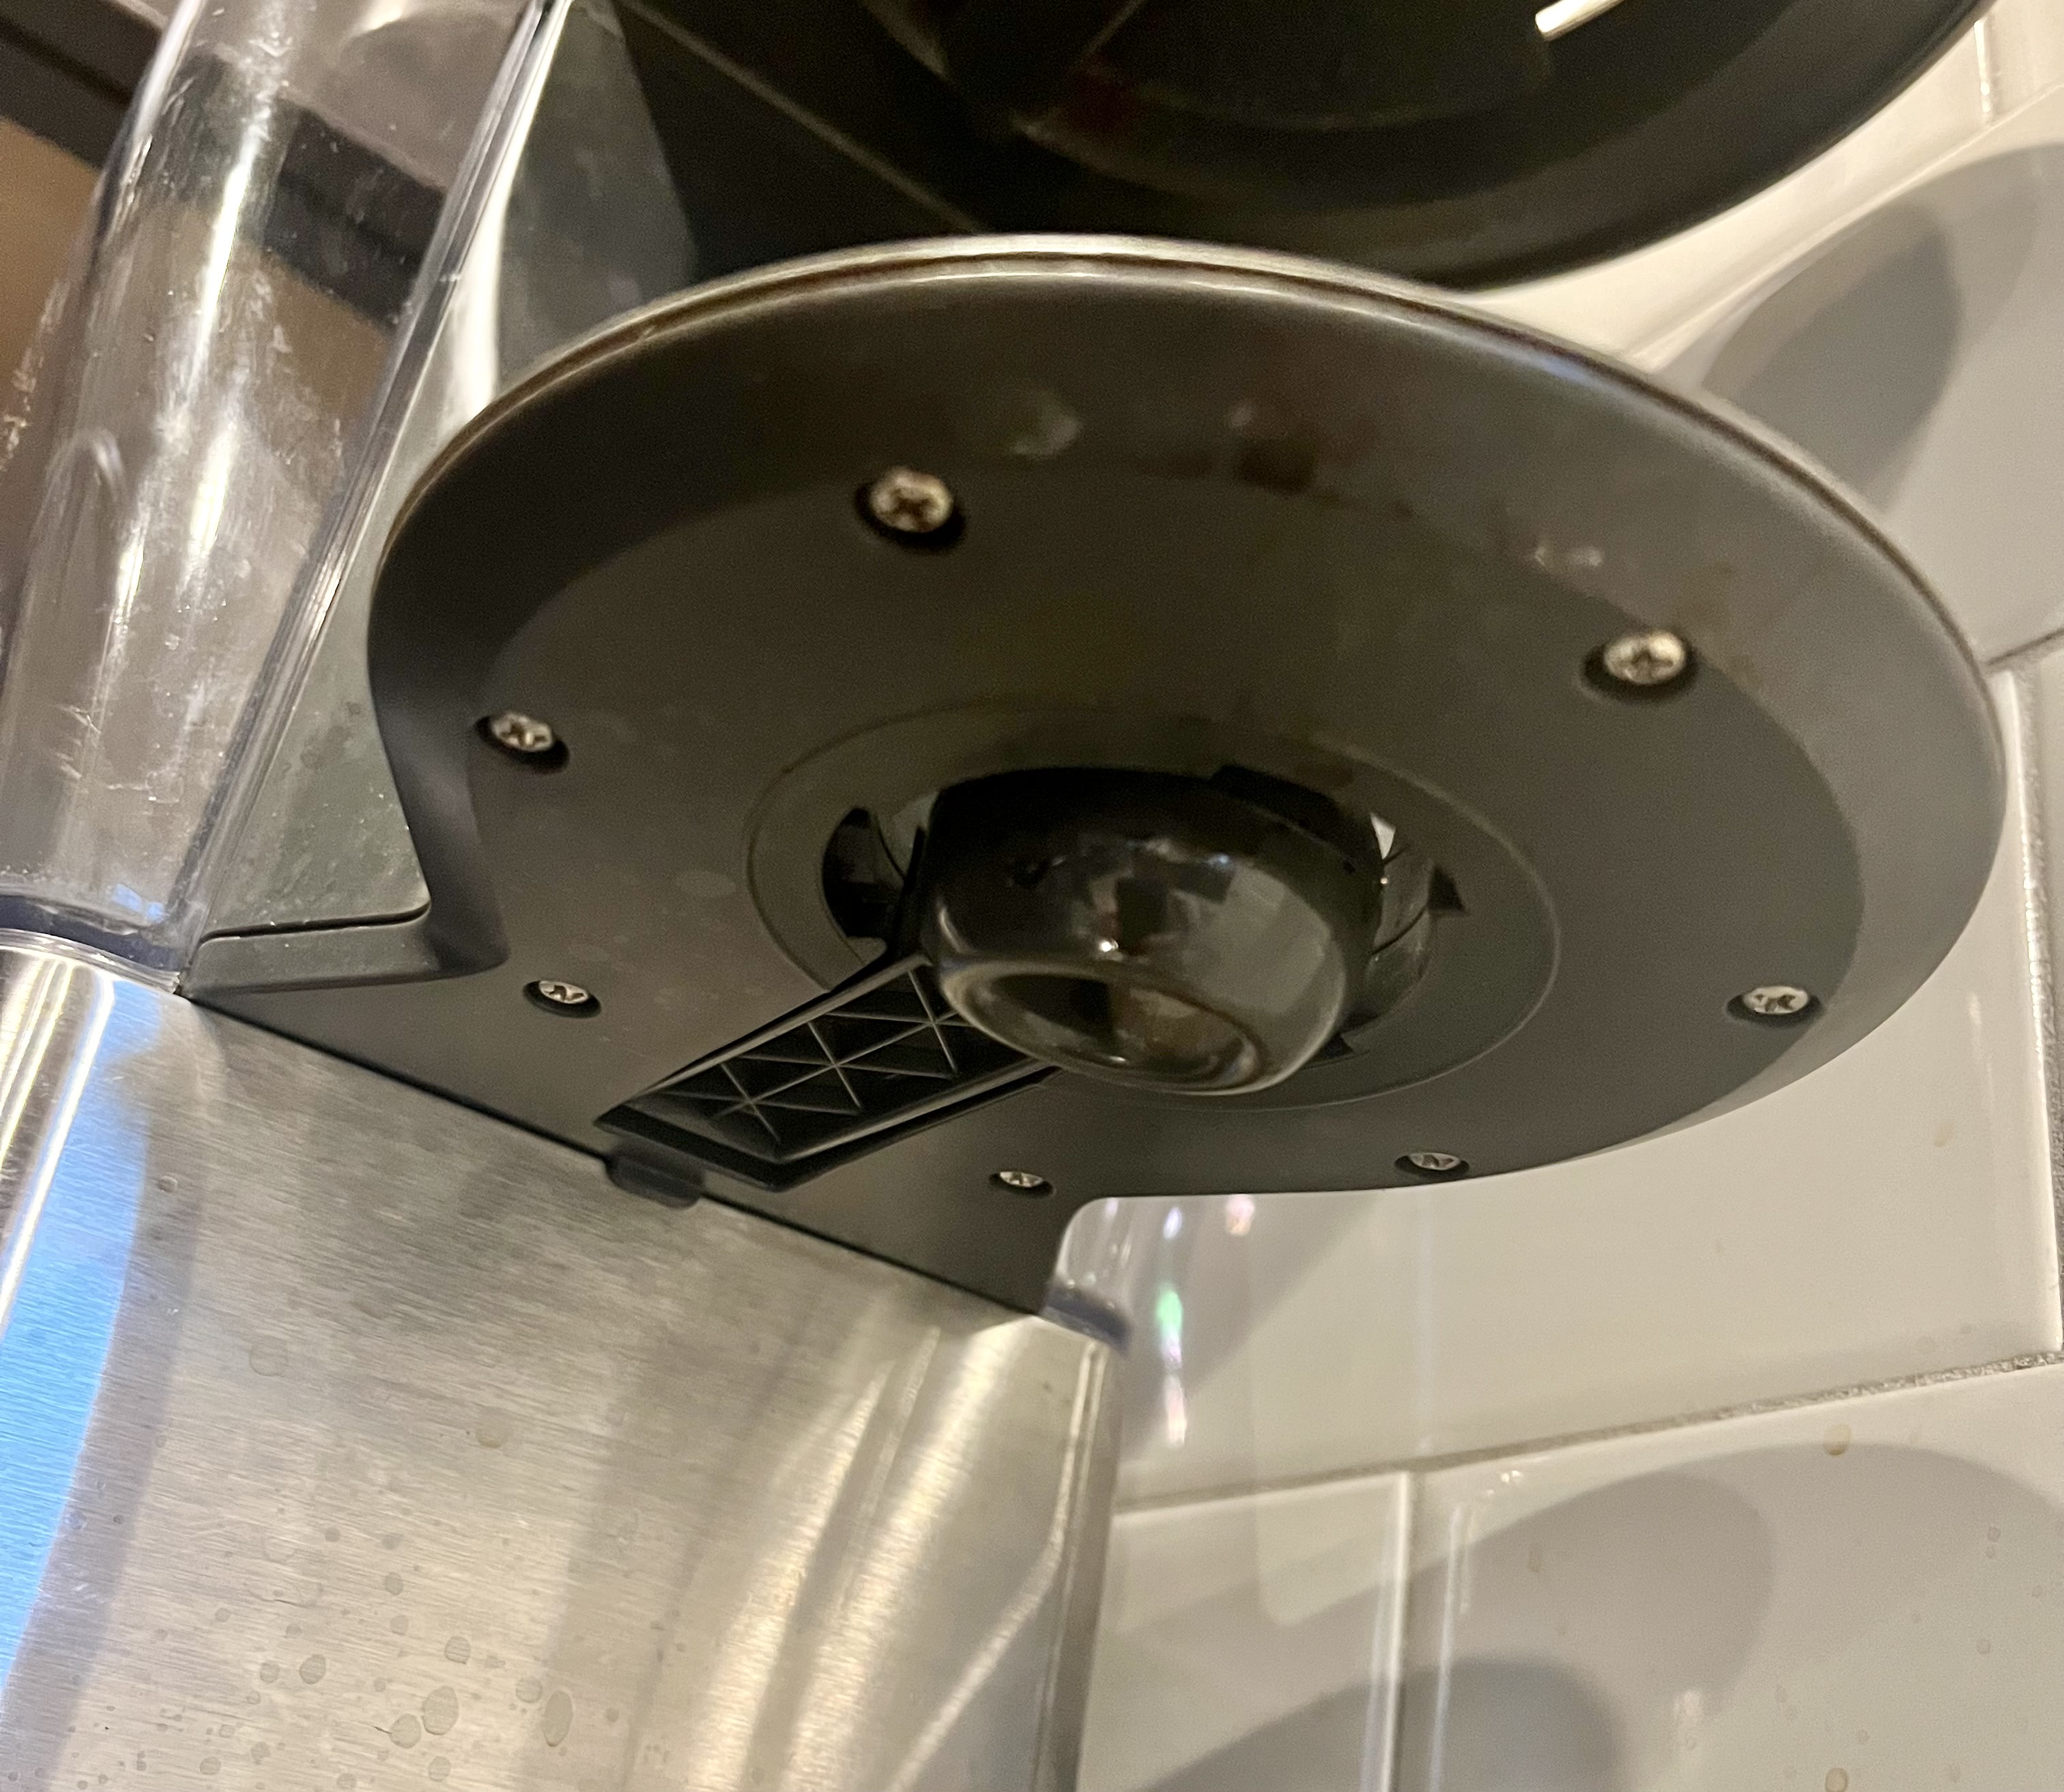 Image of the Breville Precision Brewer's flow-rate lever in the default position.